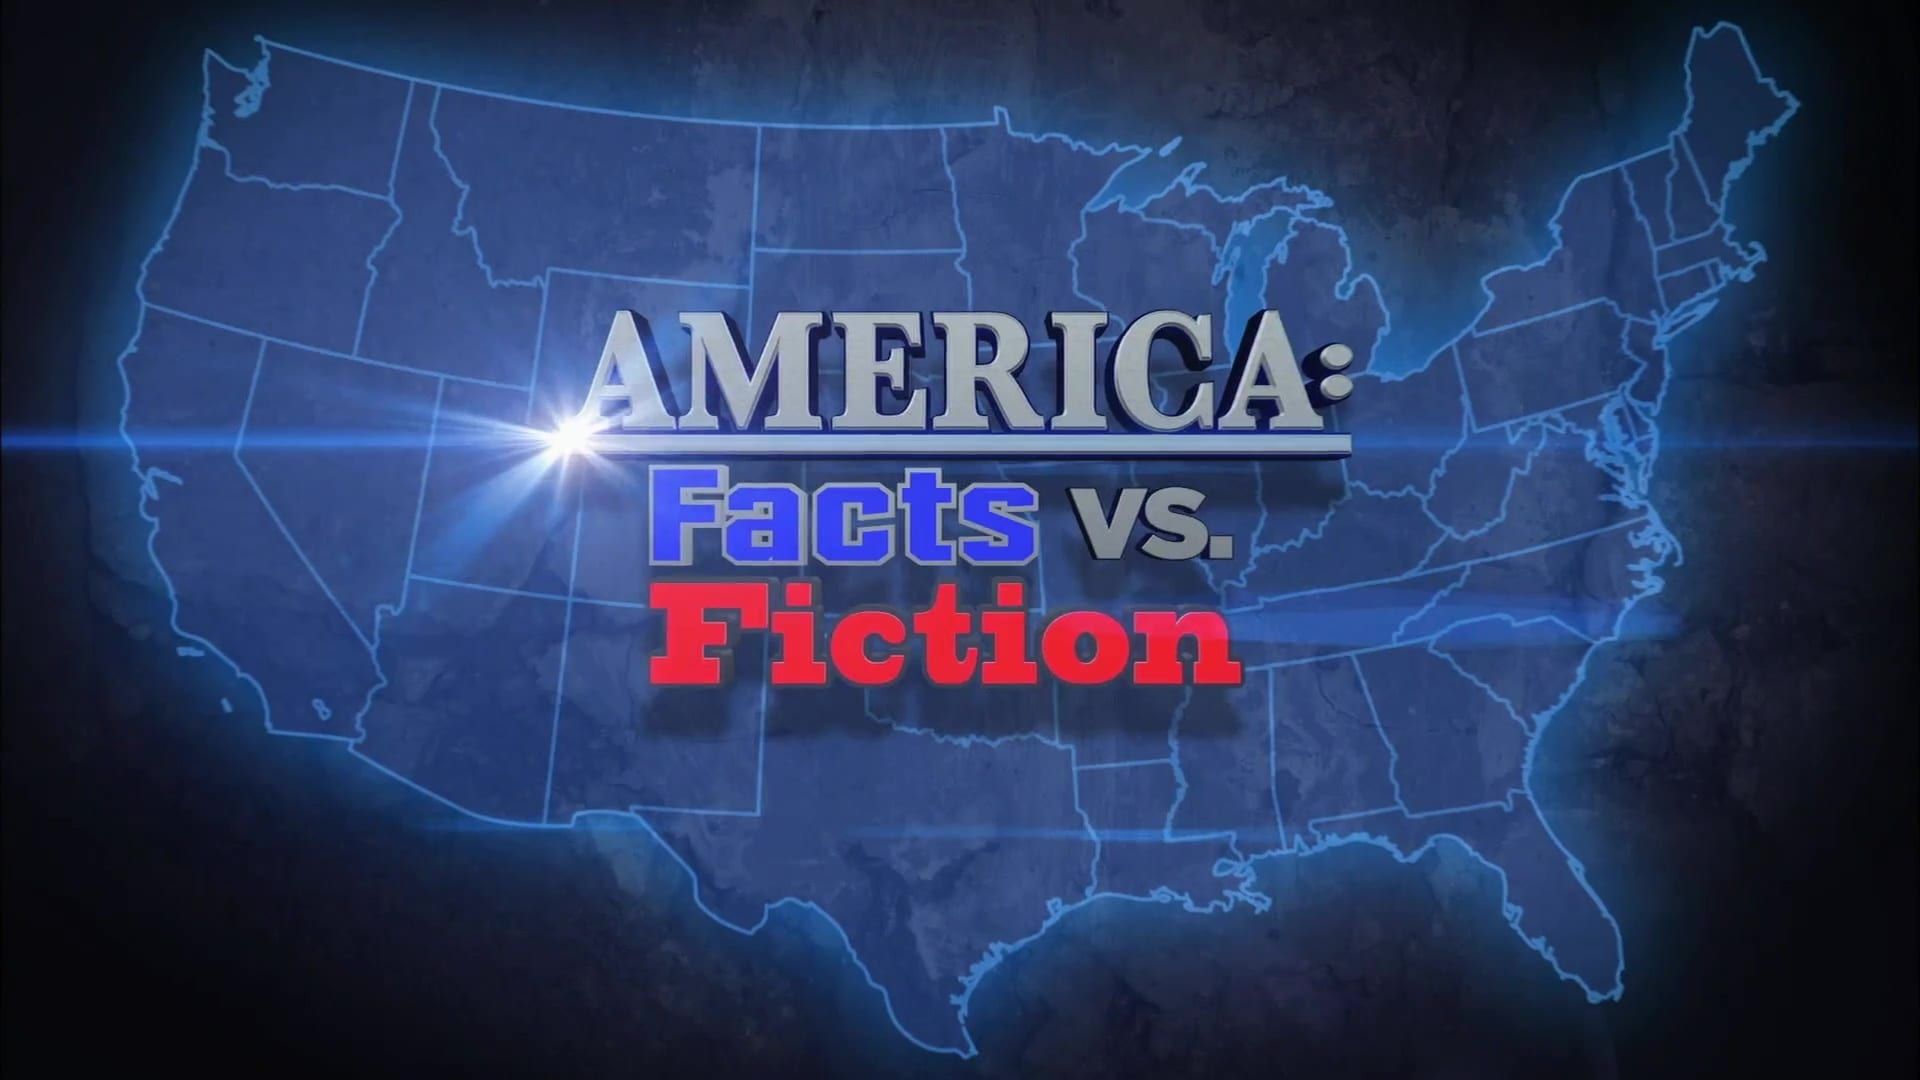 America: Facts vs. Fiction background